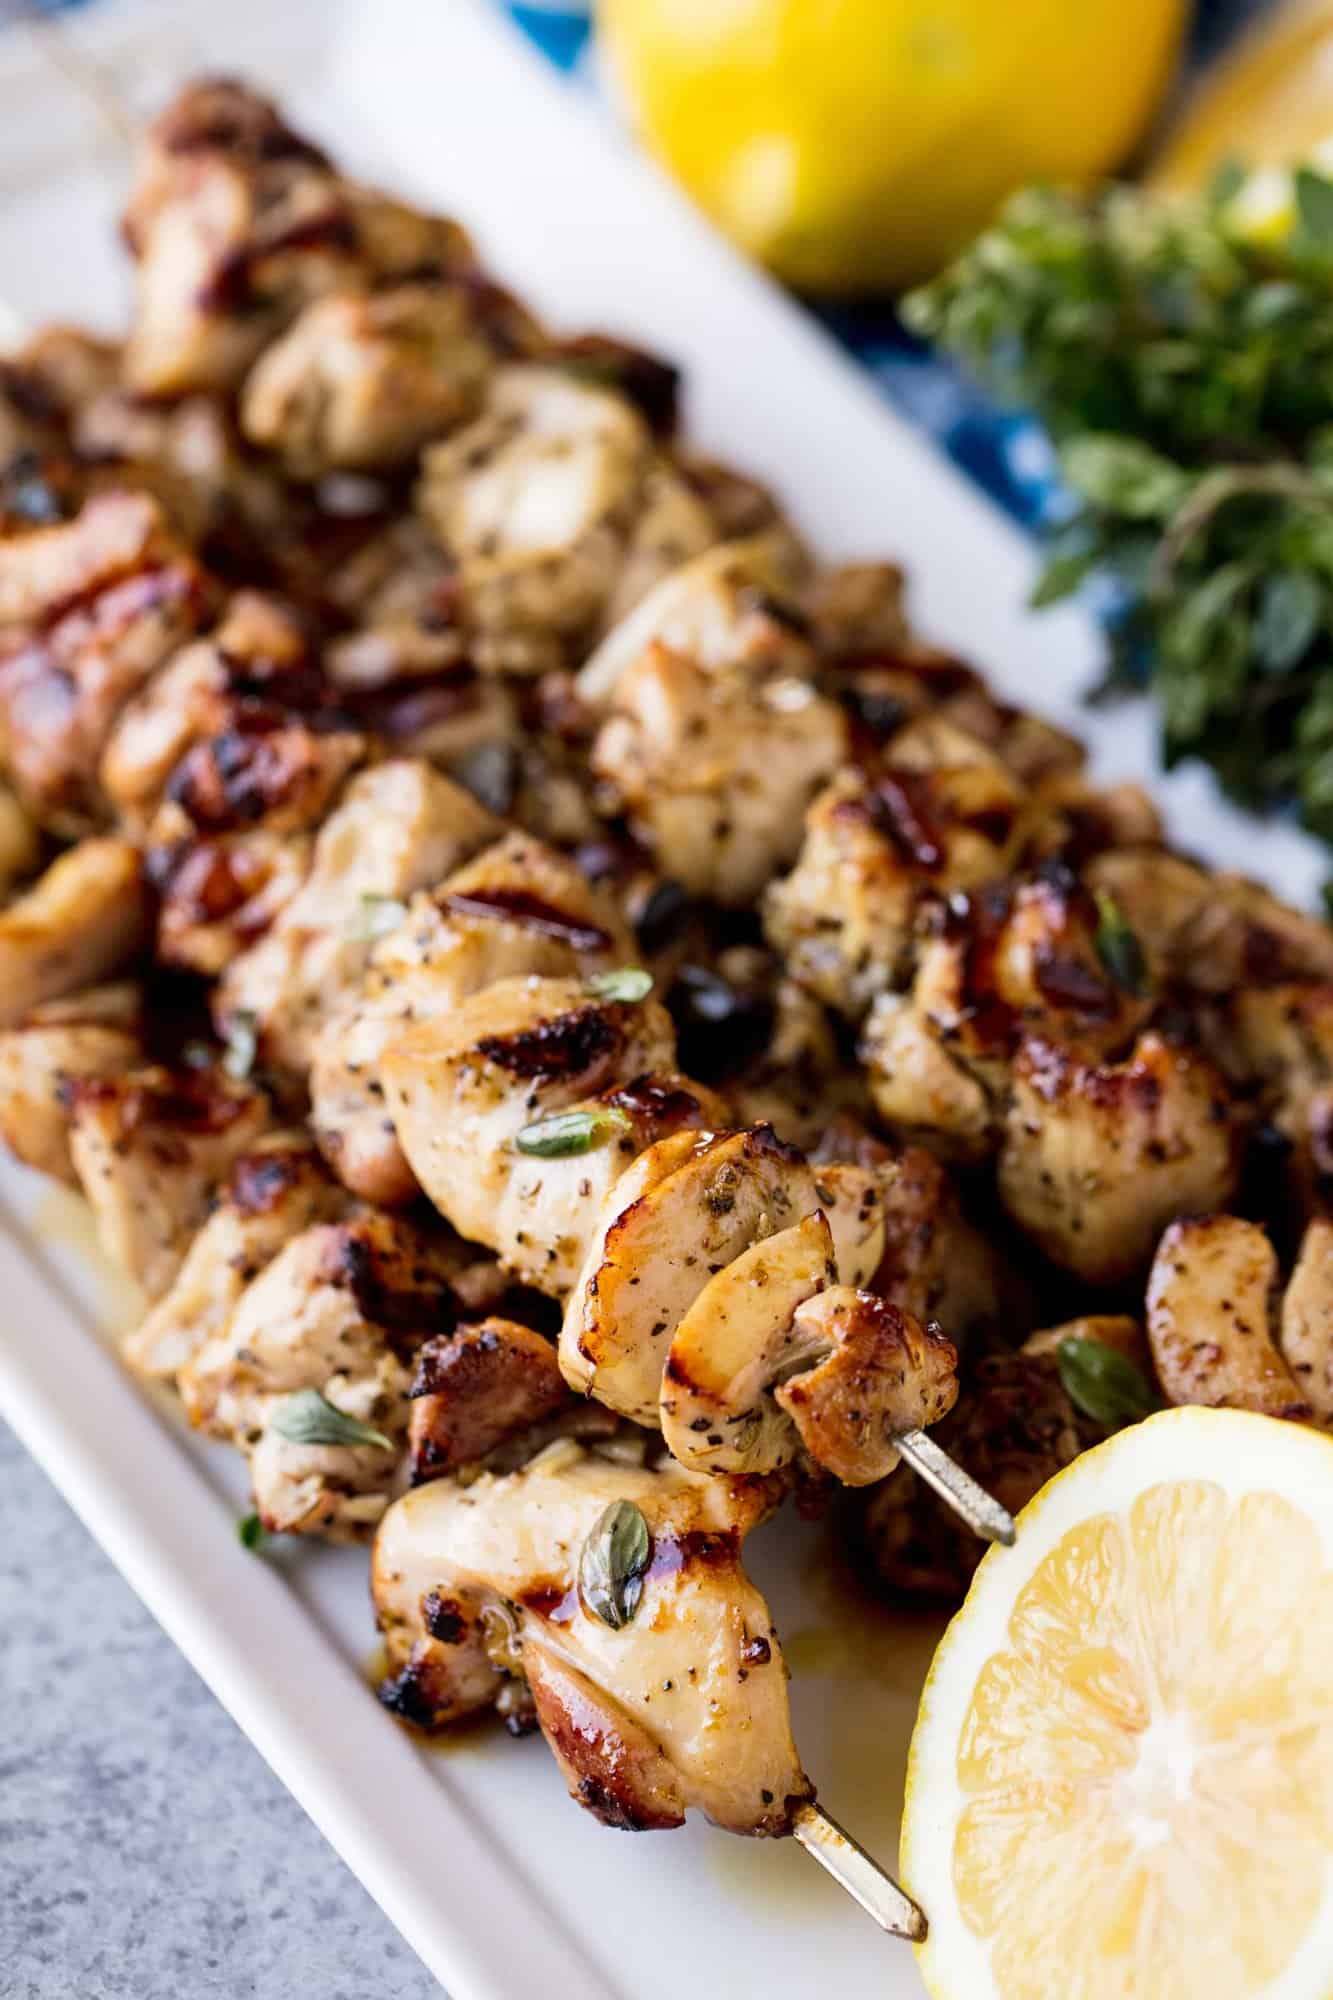 Grilled Lemon and Herb Chicken Thigh Skewers are moist and flavorful and super easy to make. People are always blown away by how much delicious flavor these skewers pack in!